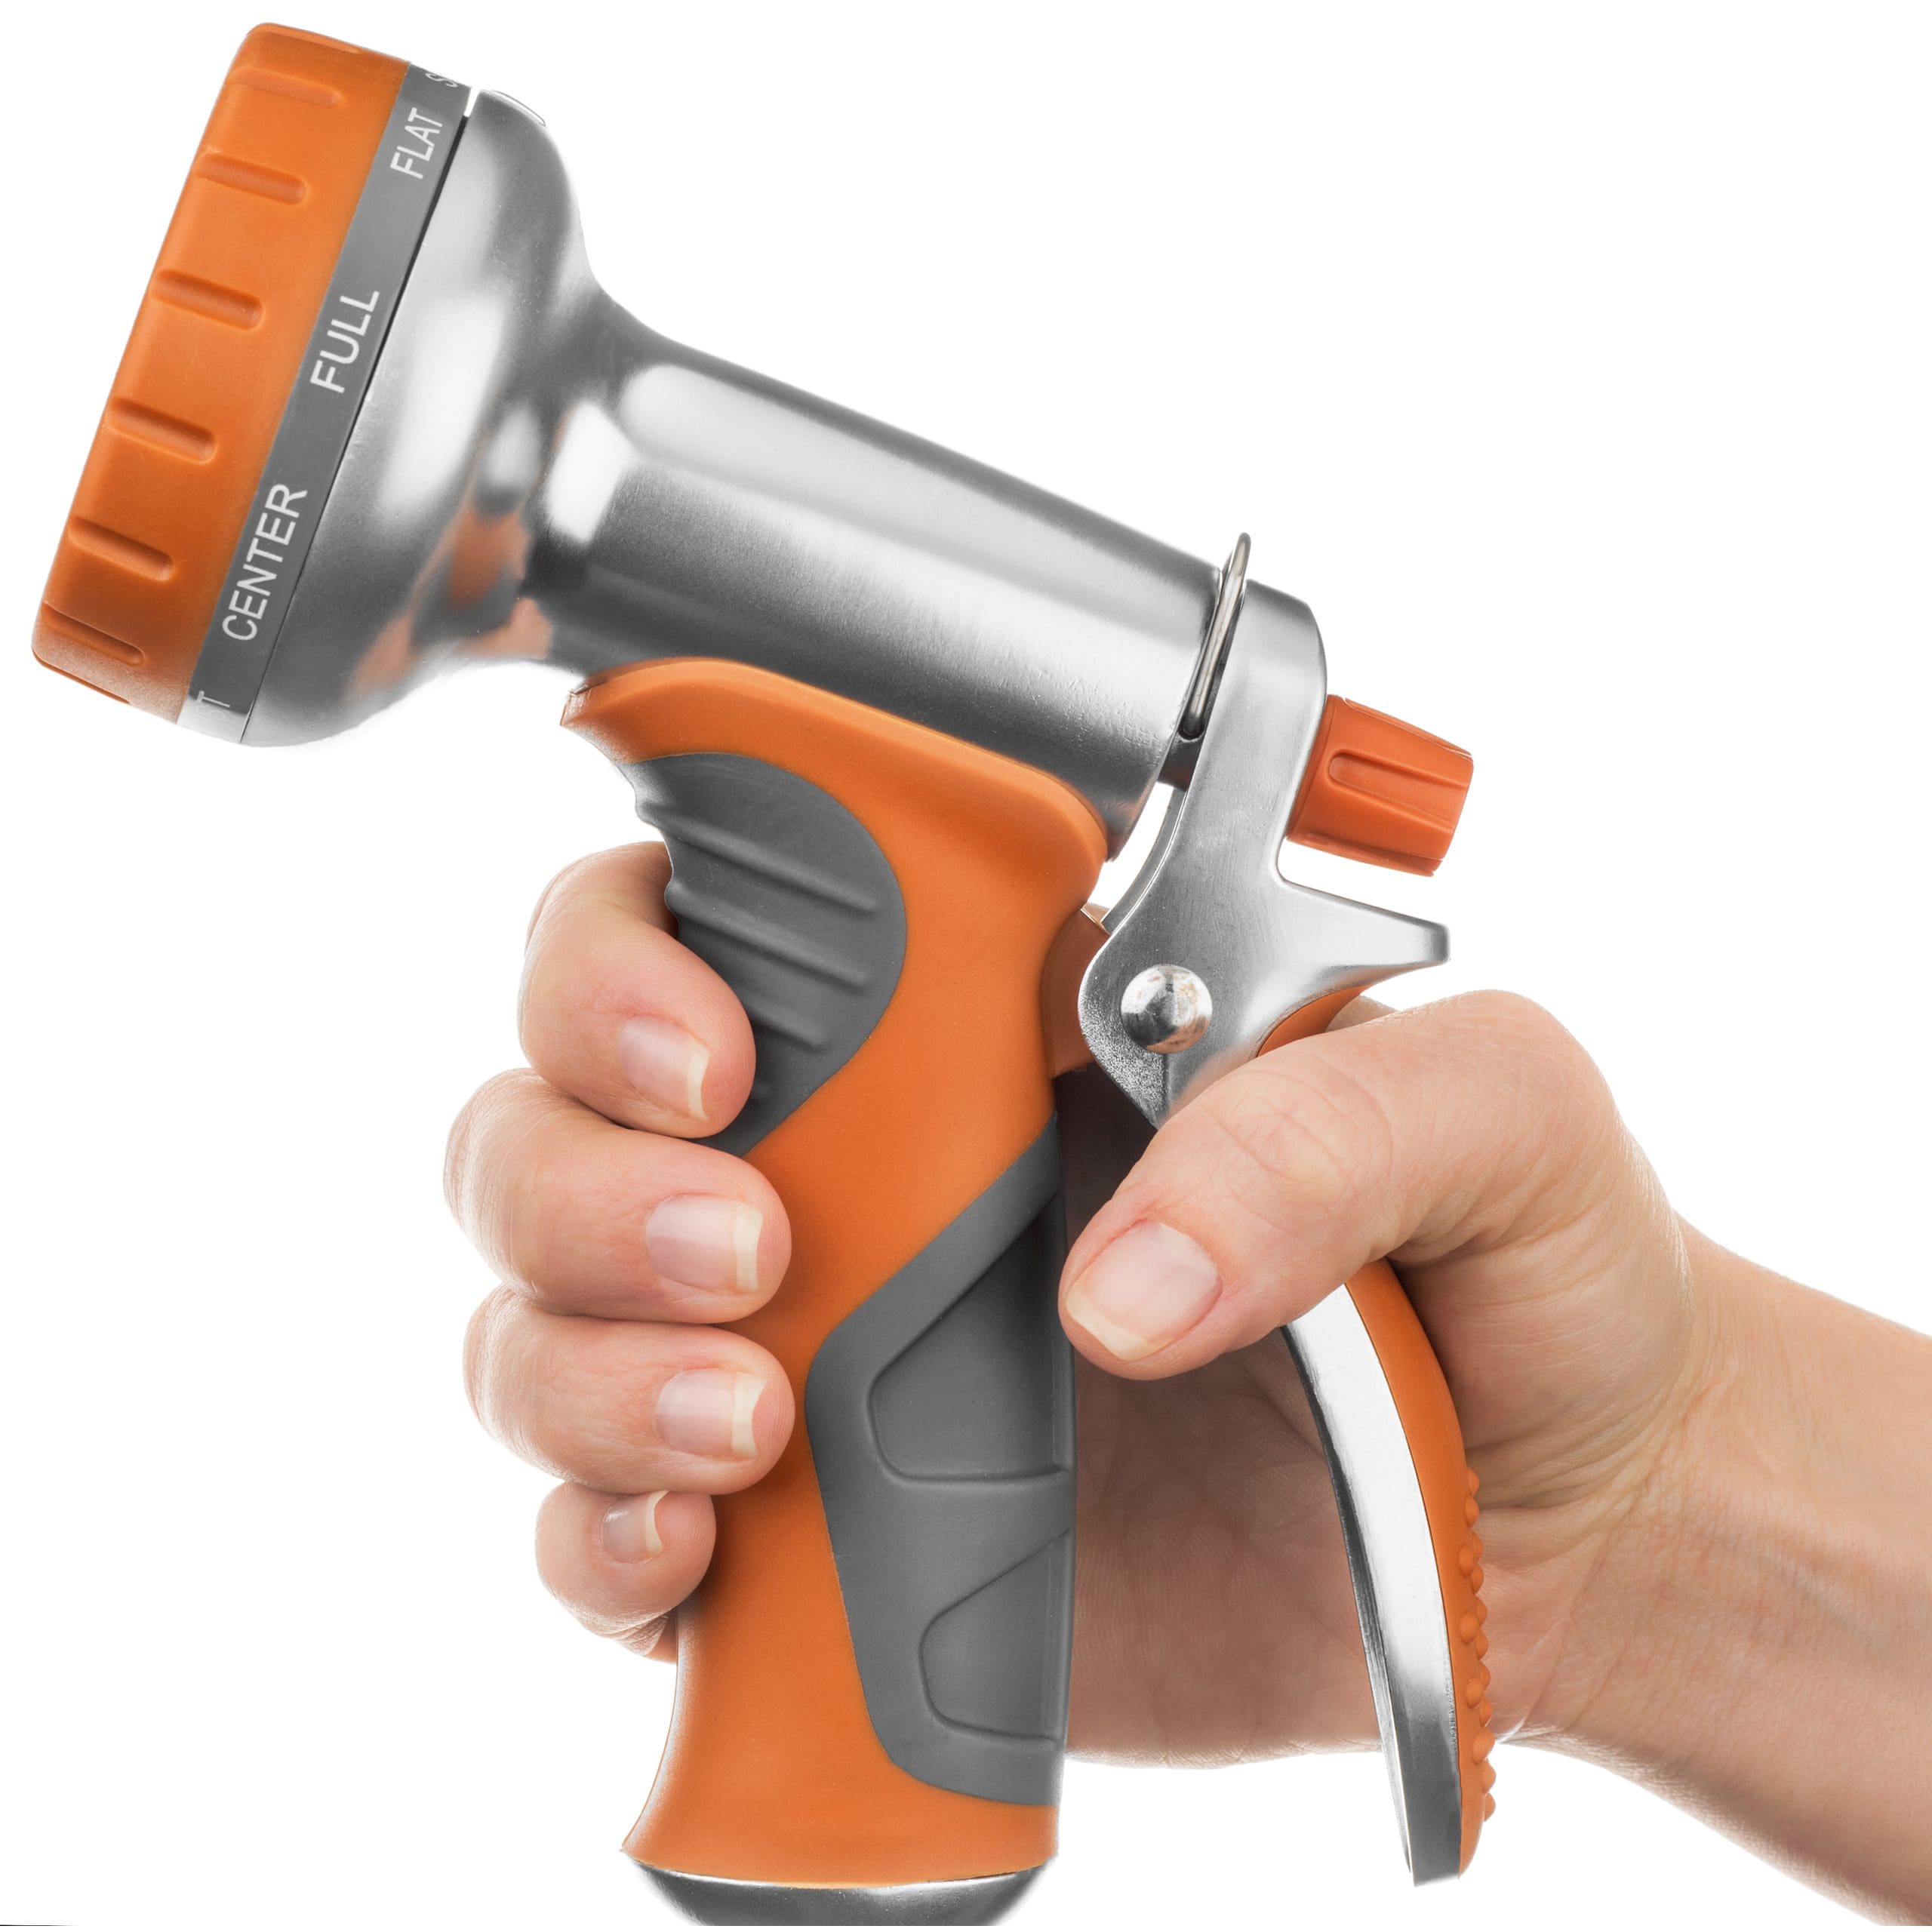 A hand model gripping an adjustable garden hose nozzle.